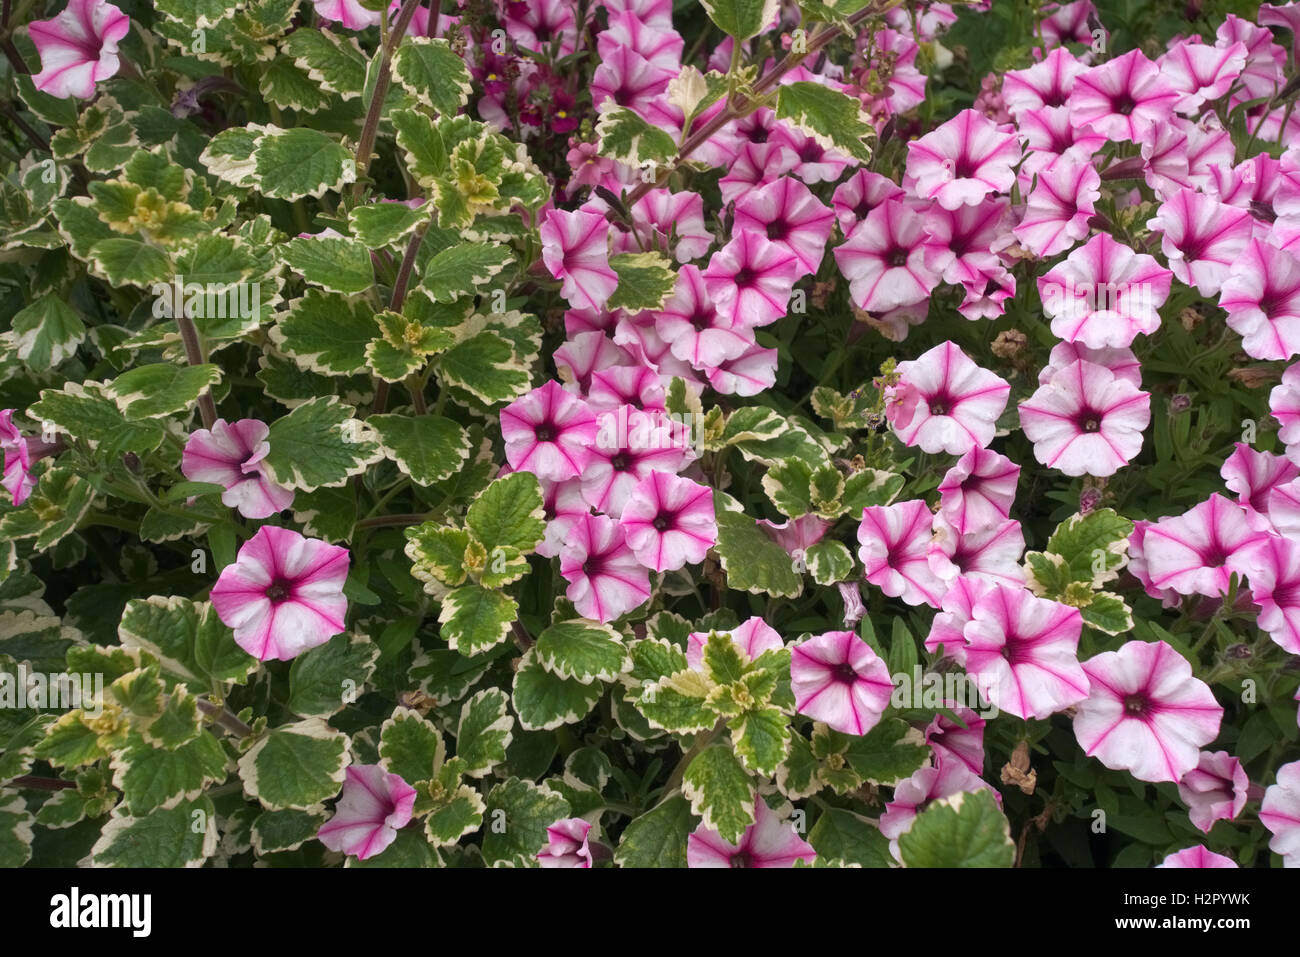 Petunia Supertunia® Pink Star Charm with Plectranthus madagascariensis 'Variegated Mintleaf' (v) AGM Stock Photo